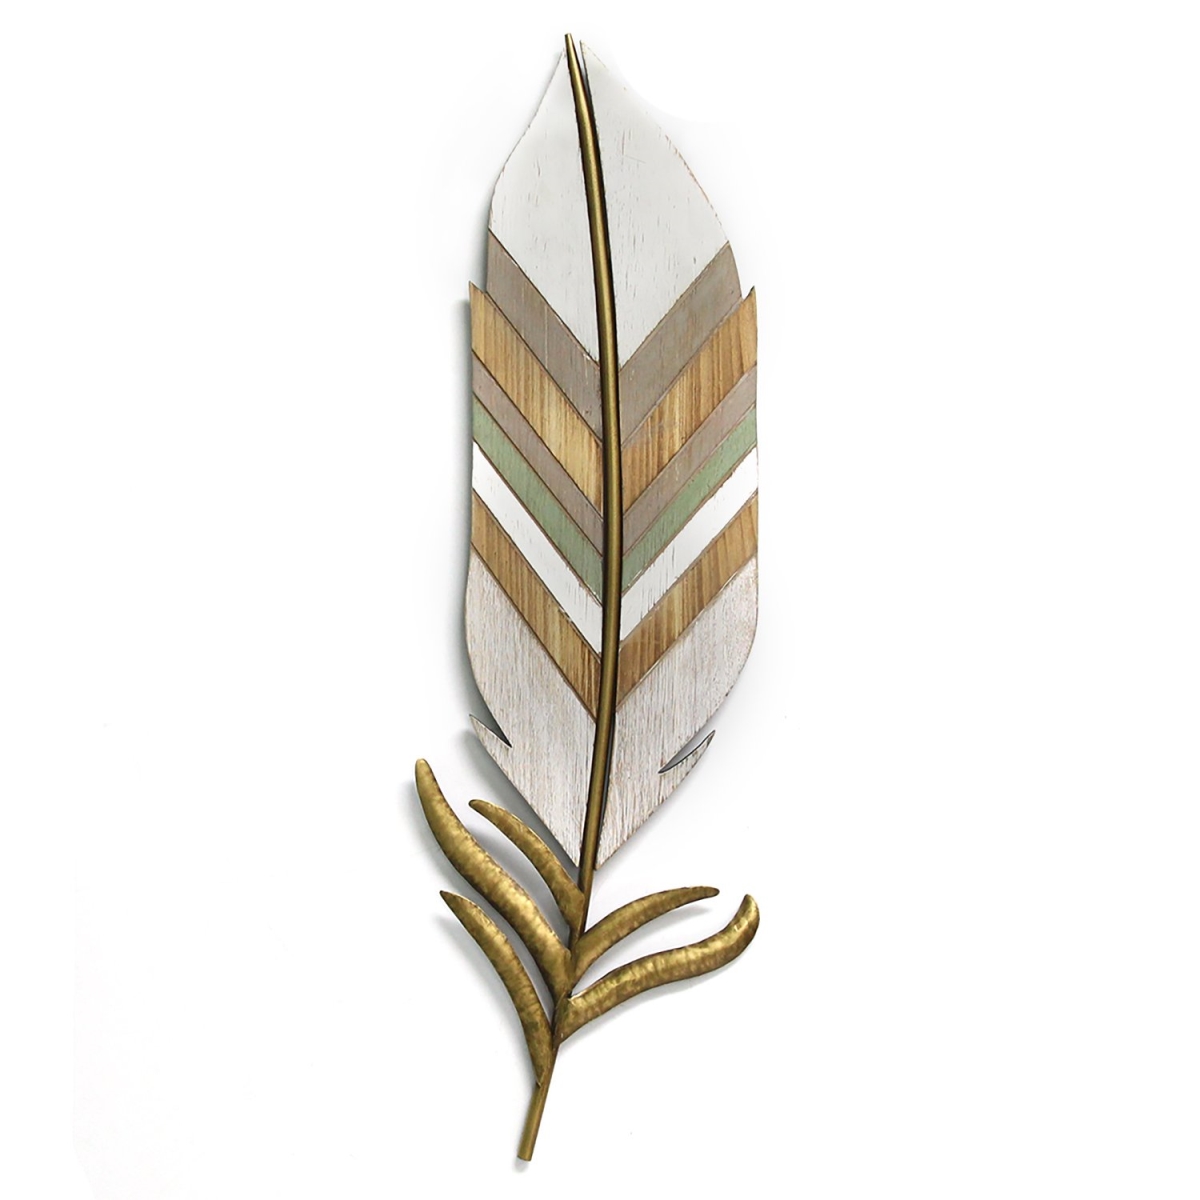 Home Roots 321276 Boho Wall Feather, White, Gold, Green & Natural Wood